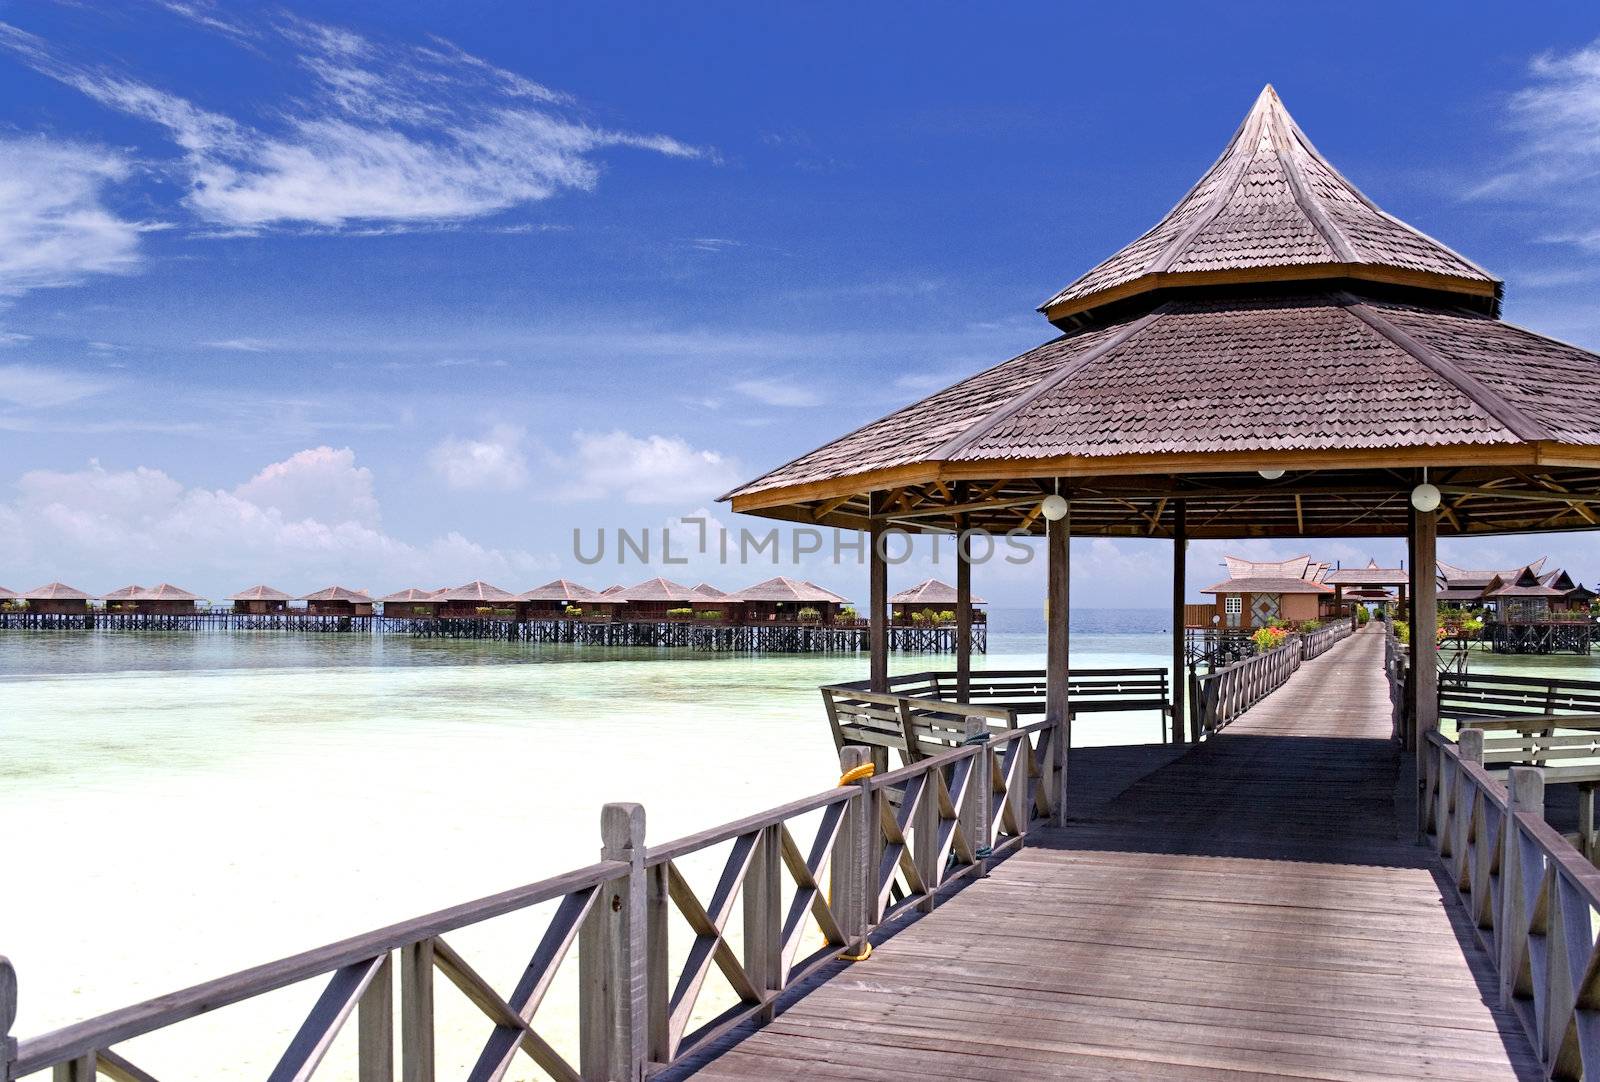 Image of a walkway and huts on stilts on a remote Malaysian tropical island with deep blue skies and crystal clear waters.